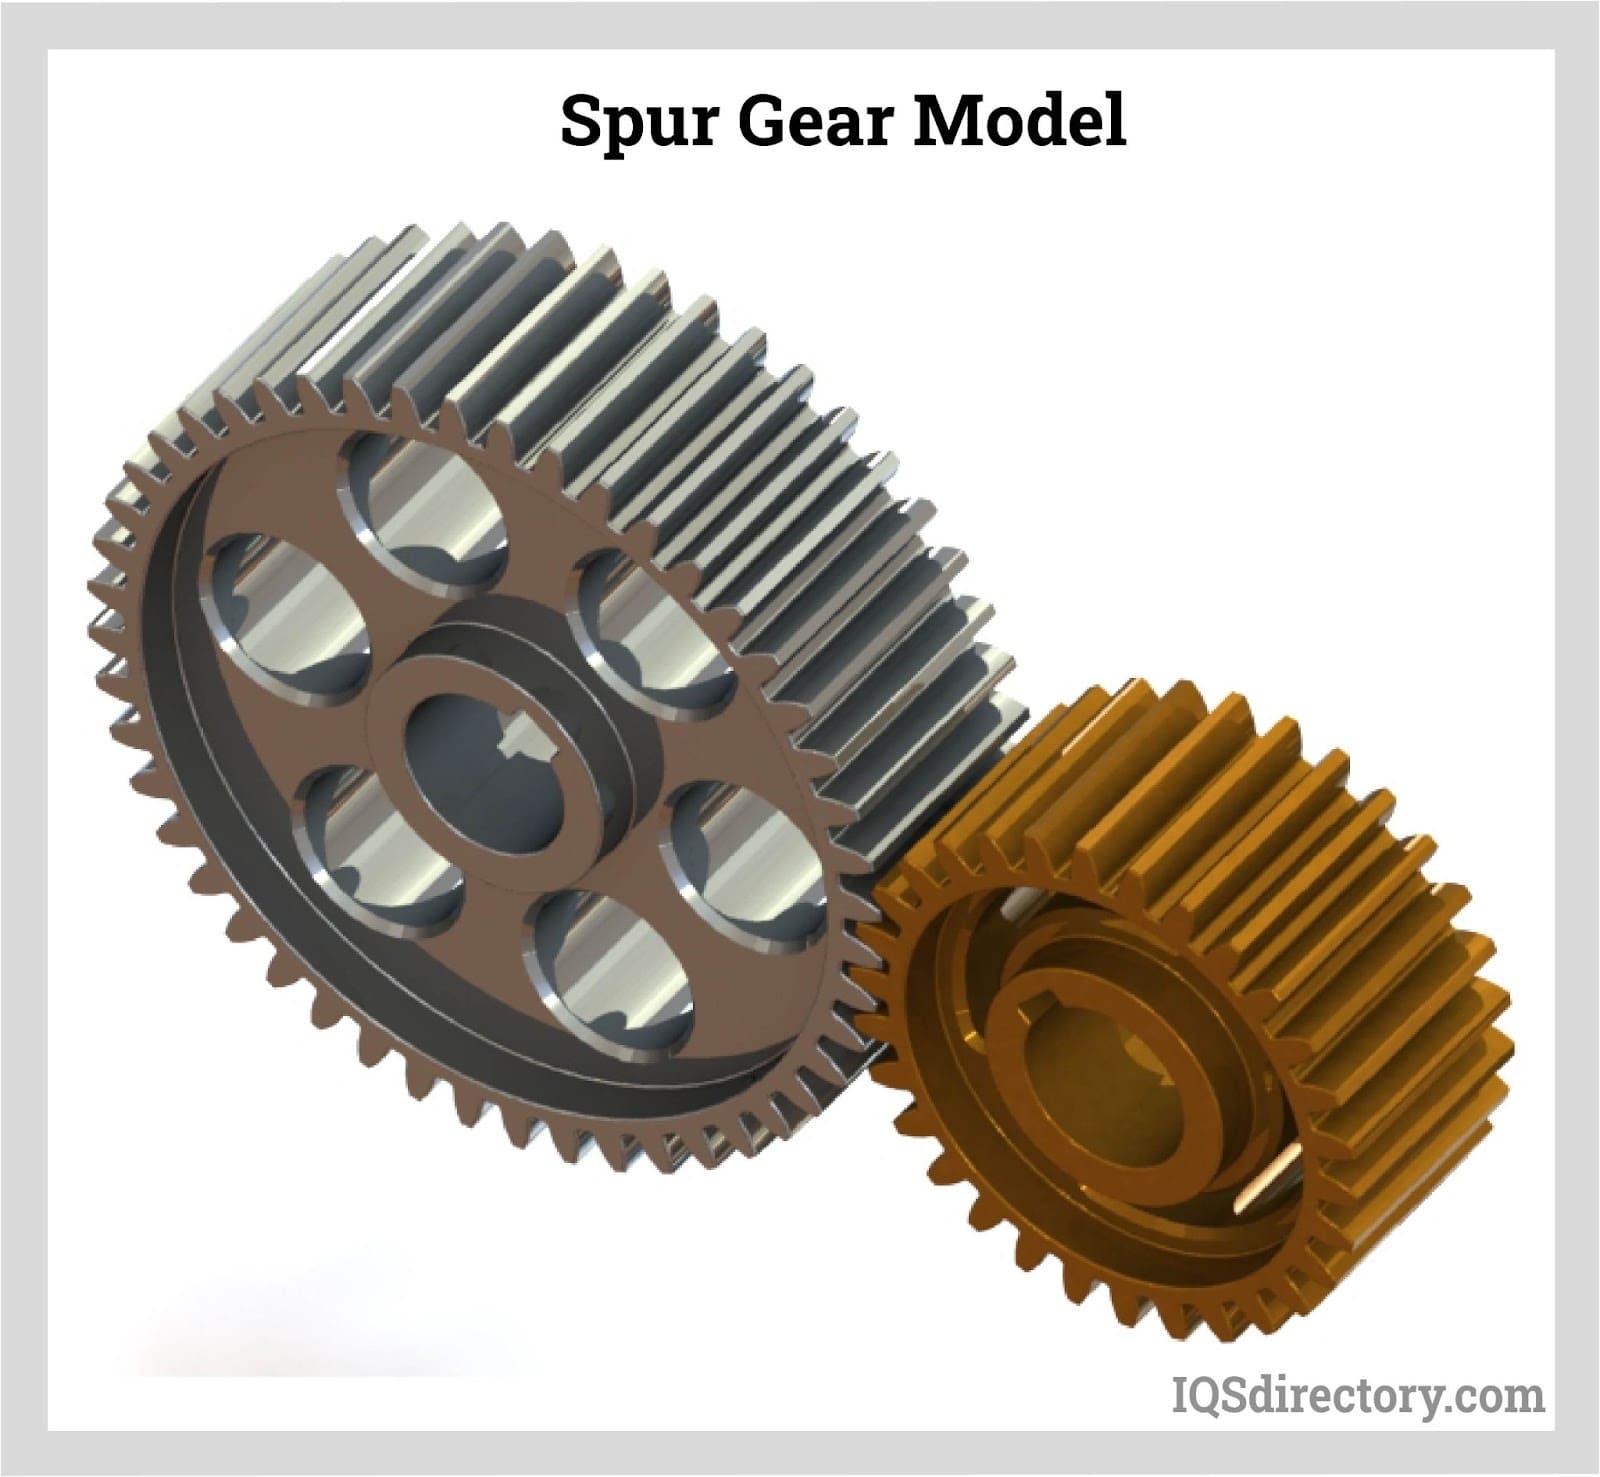 Spur Gears: Types, Uses, Benefits, and Manufacturing